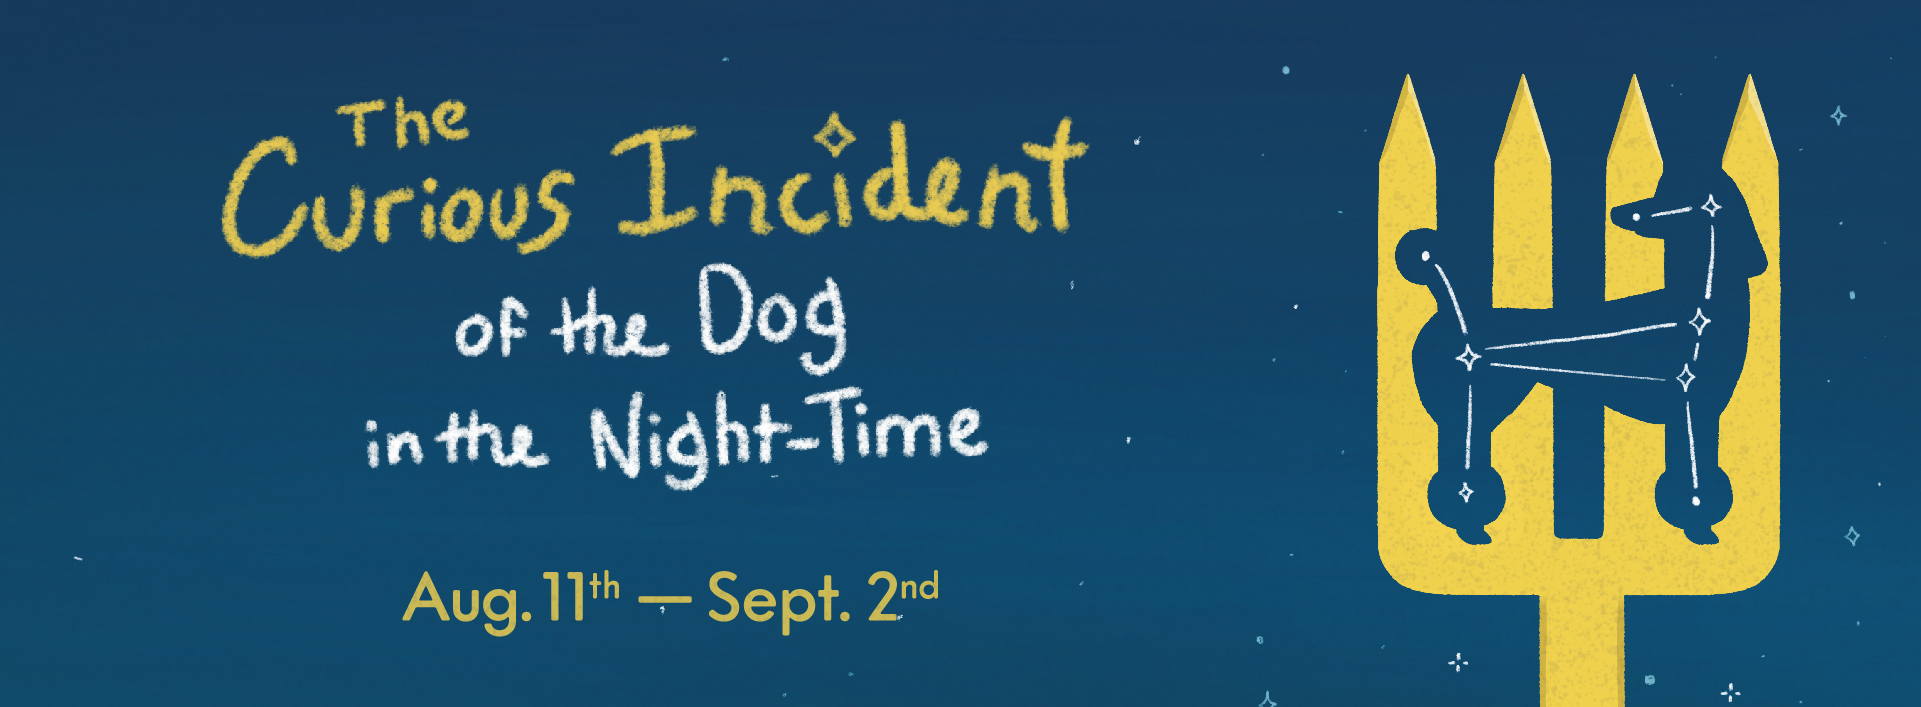 Program for The Curious Incident of the Dog in the Night-Time